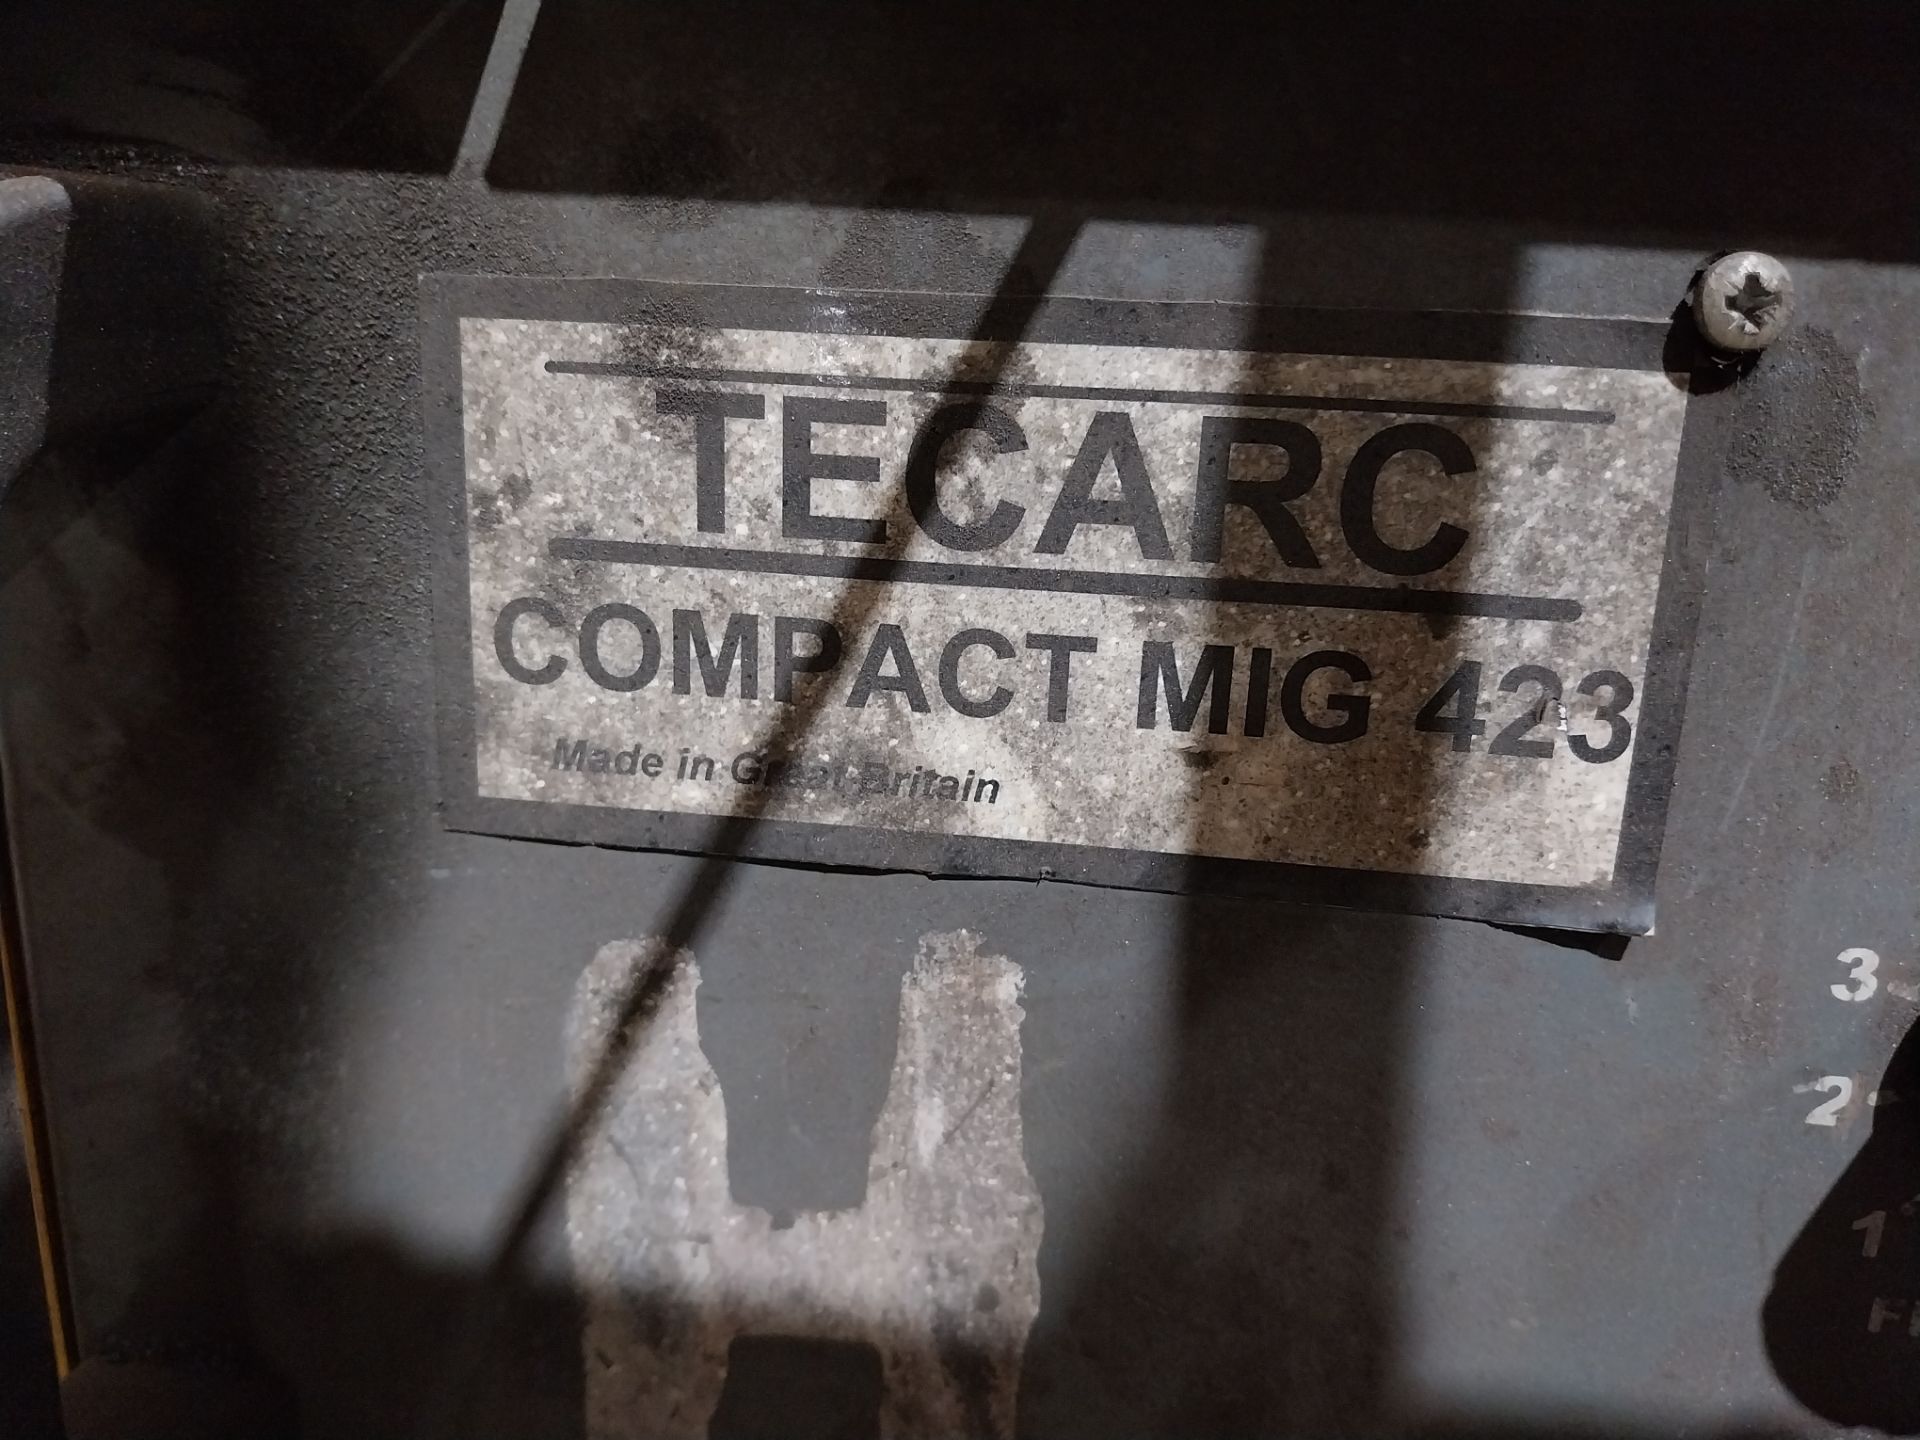 TecArc Compact mig 423 mig welder with torch and clamp (bottle not included) - Image 3 of 4